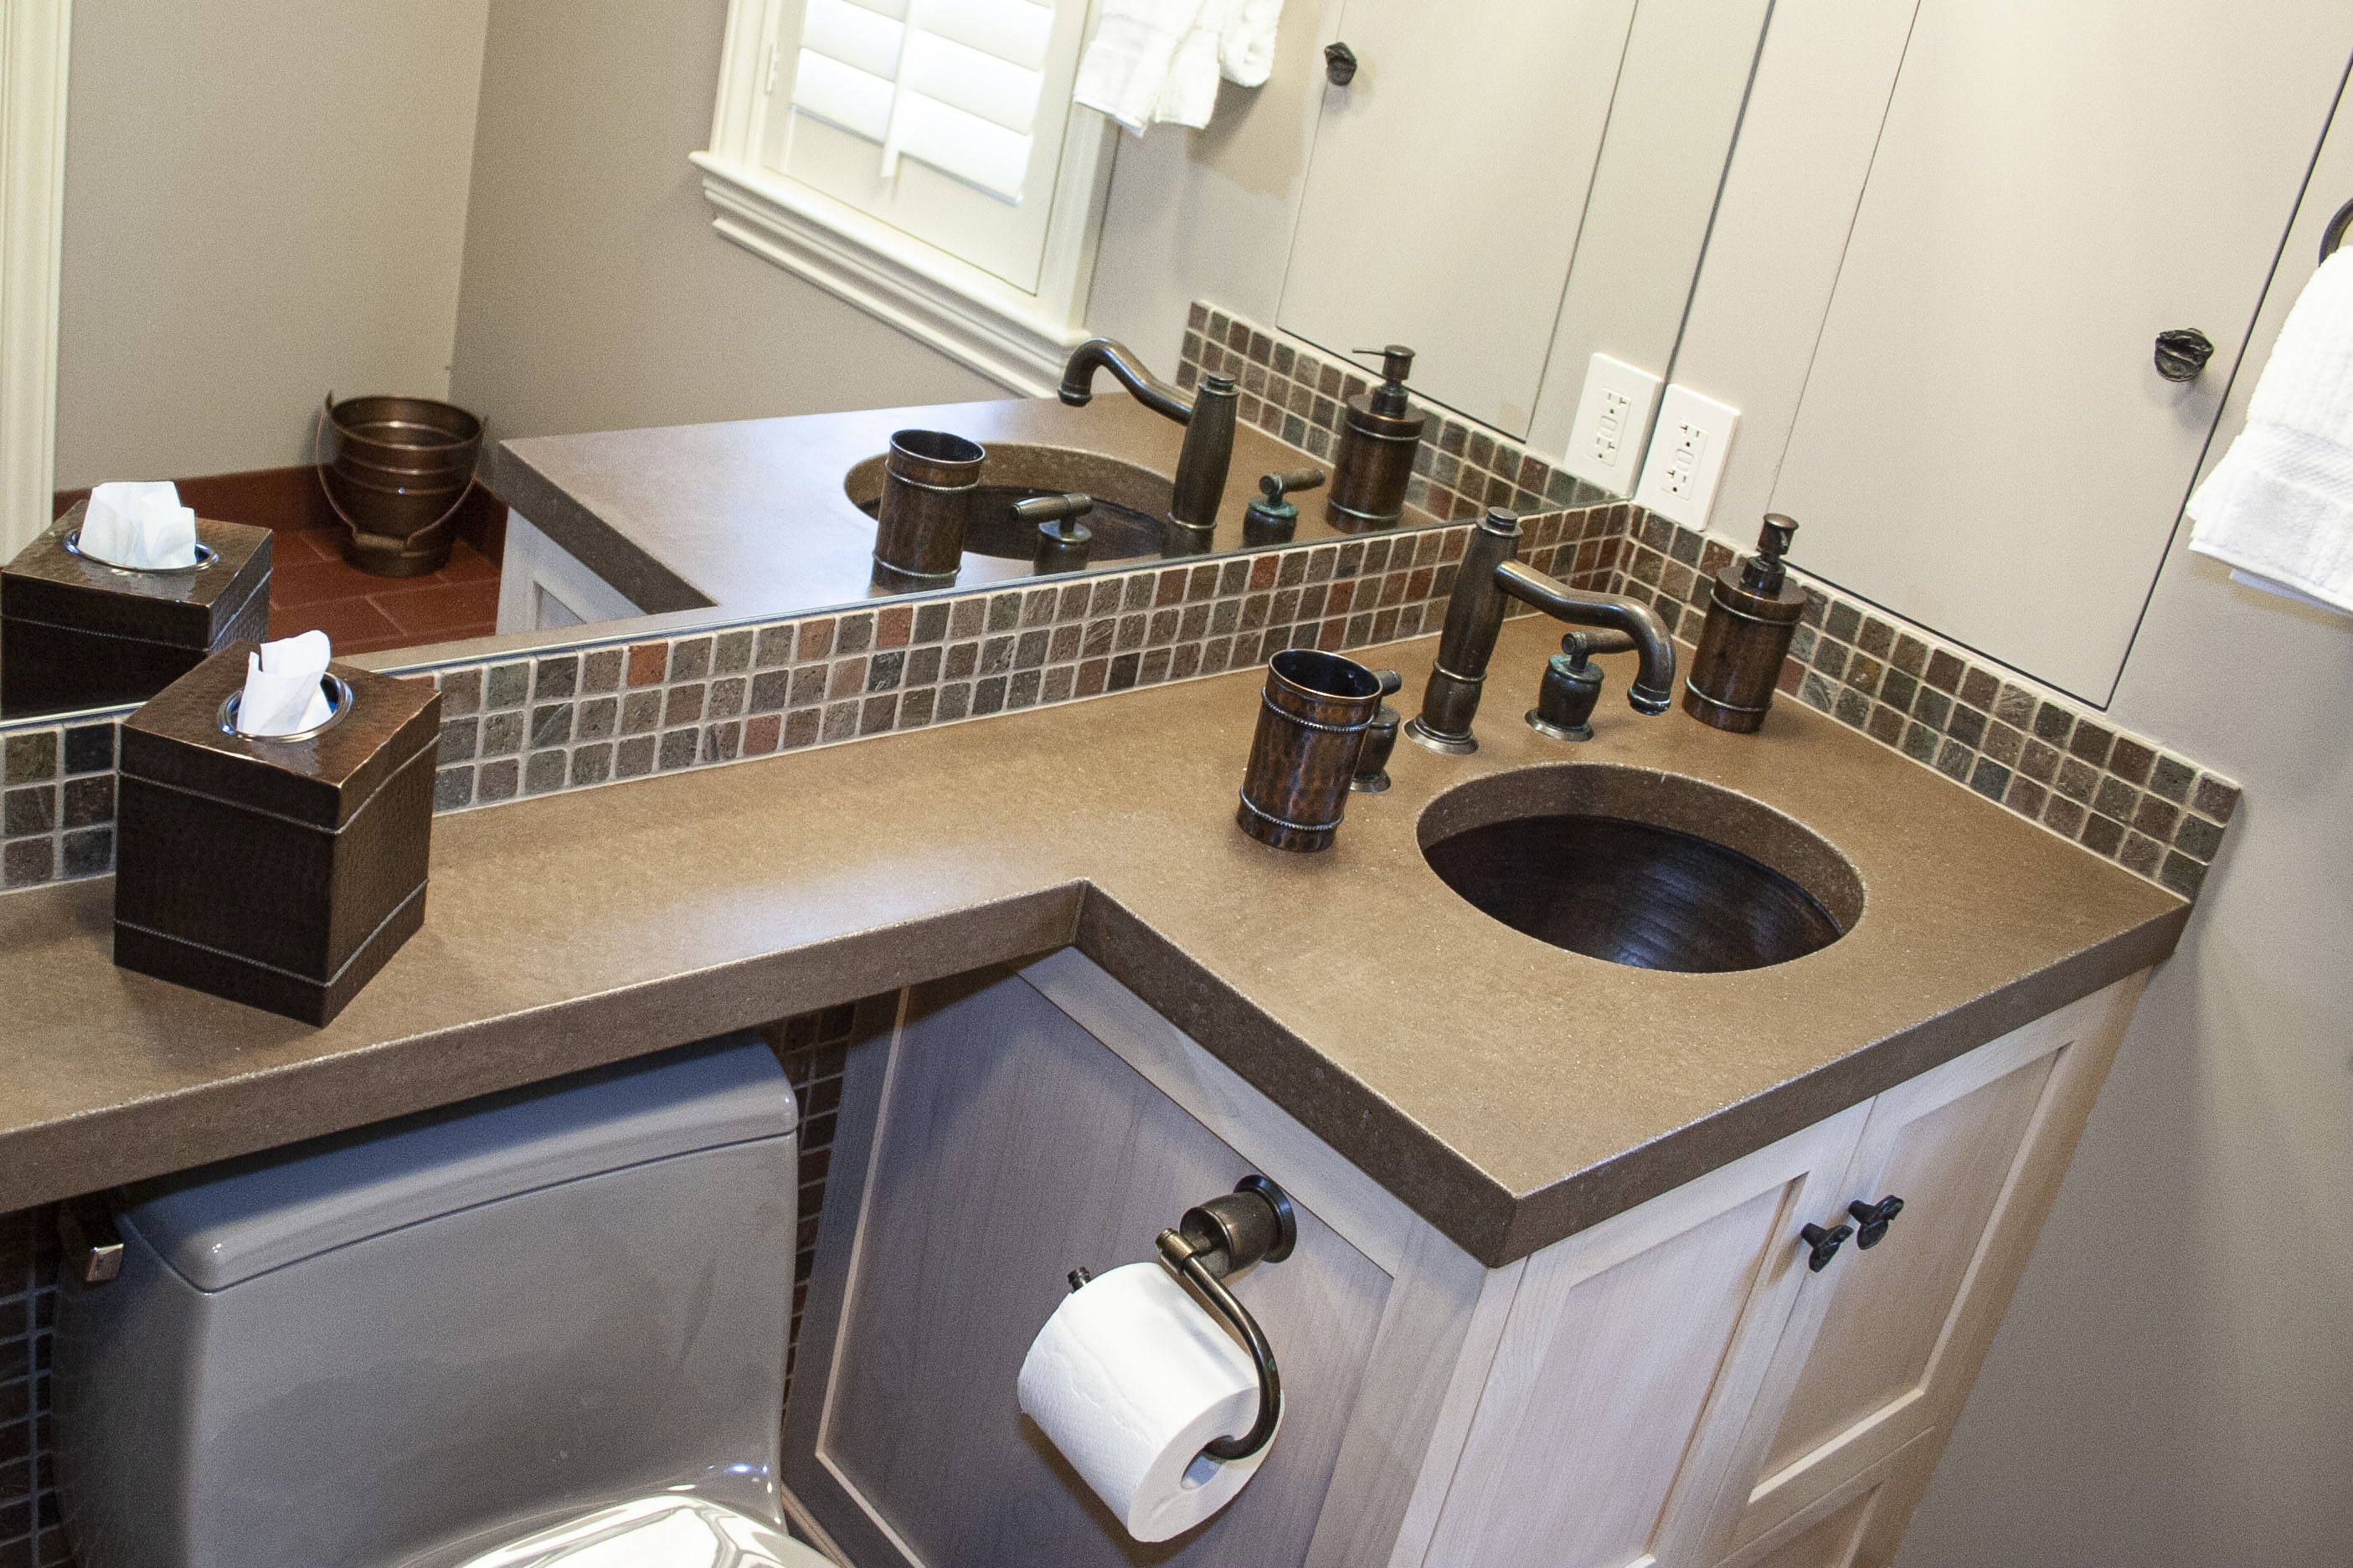 UnderMount Sink with Concrete Countertop, N610 Earth